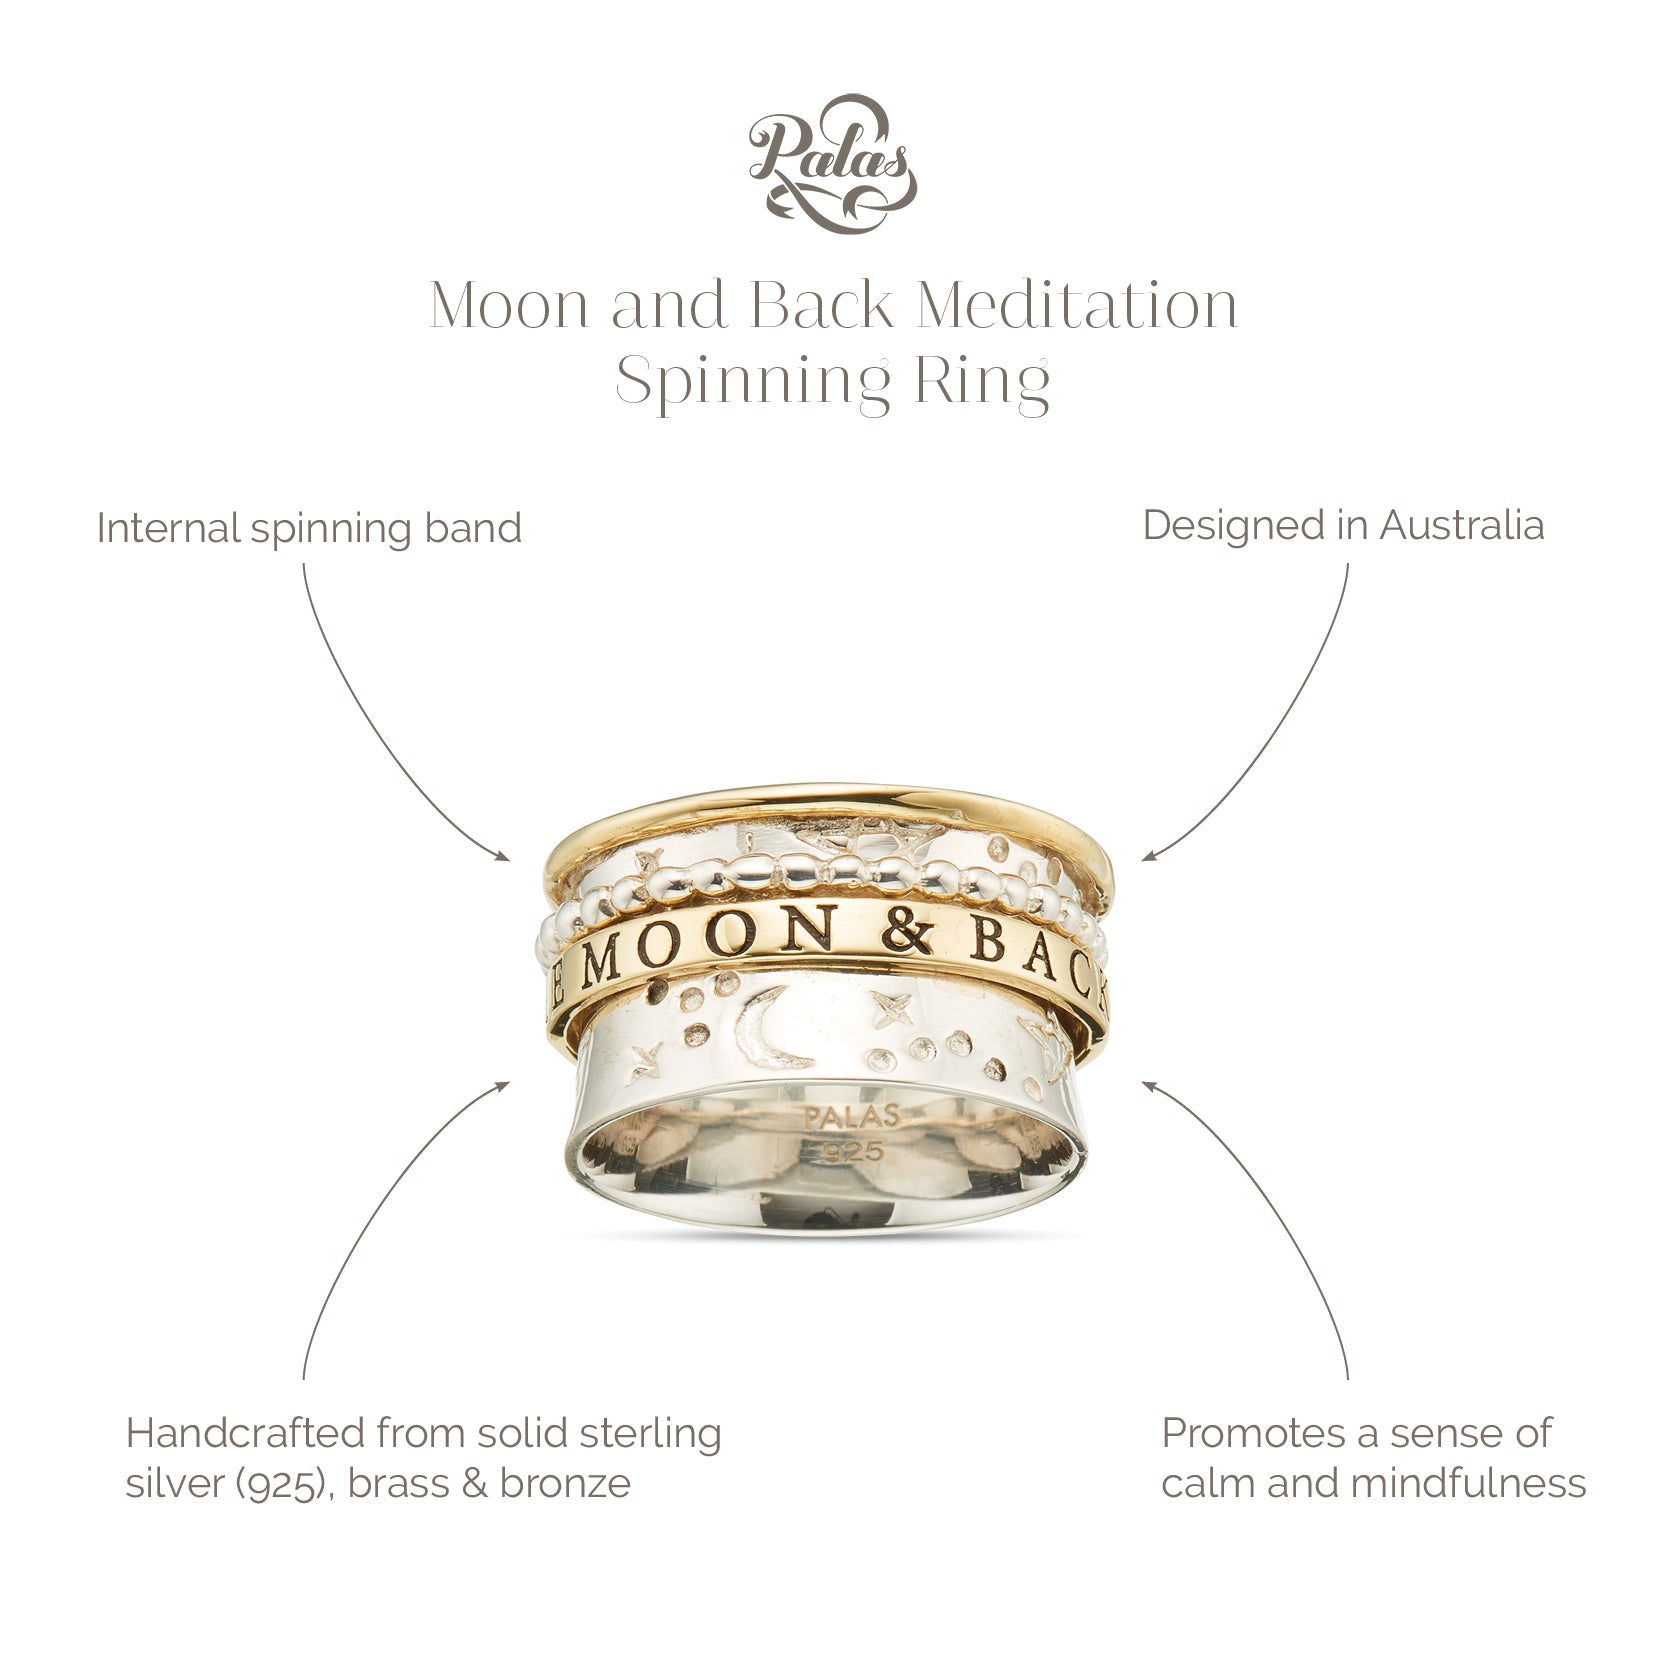 Moon and back meditation spinning ring